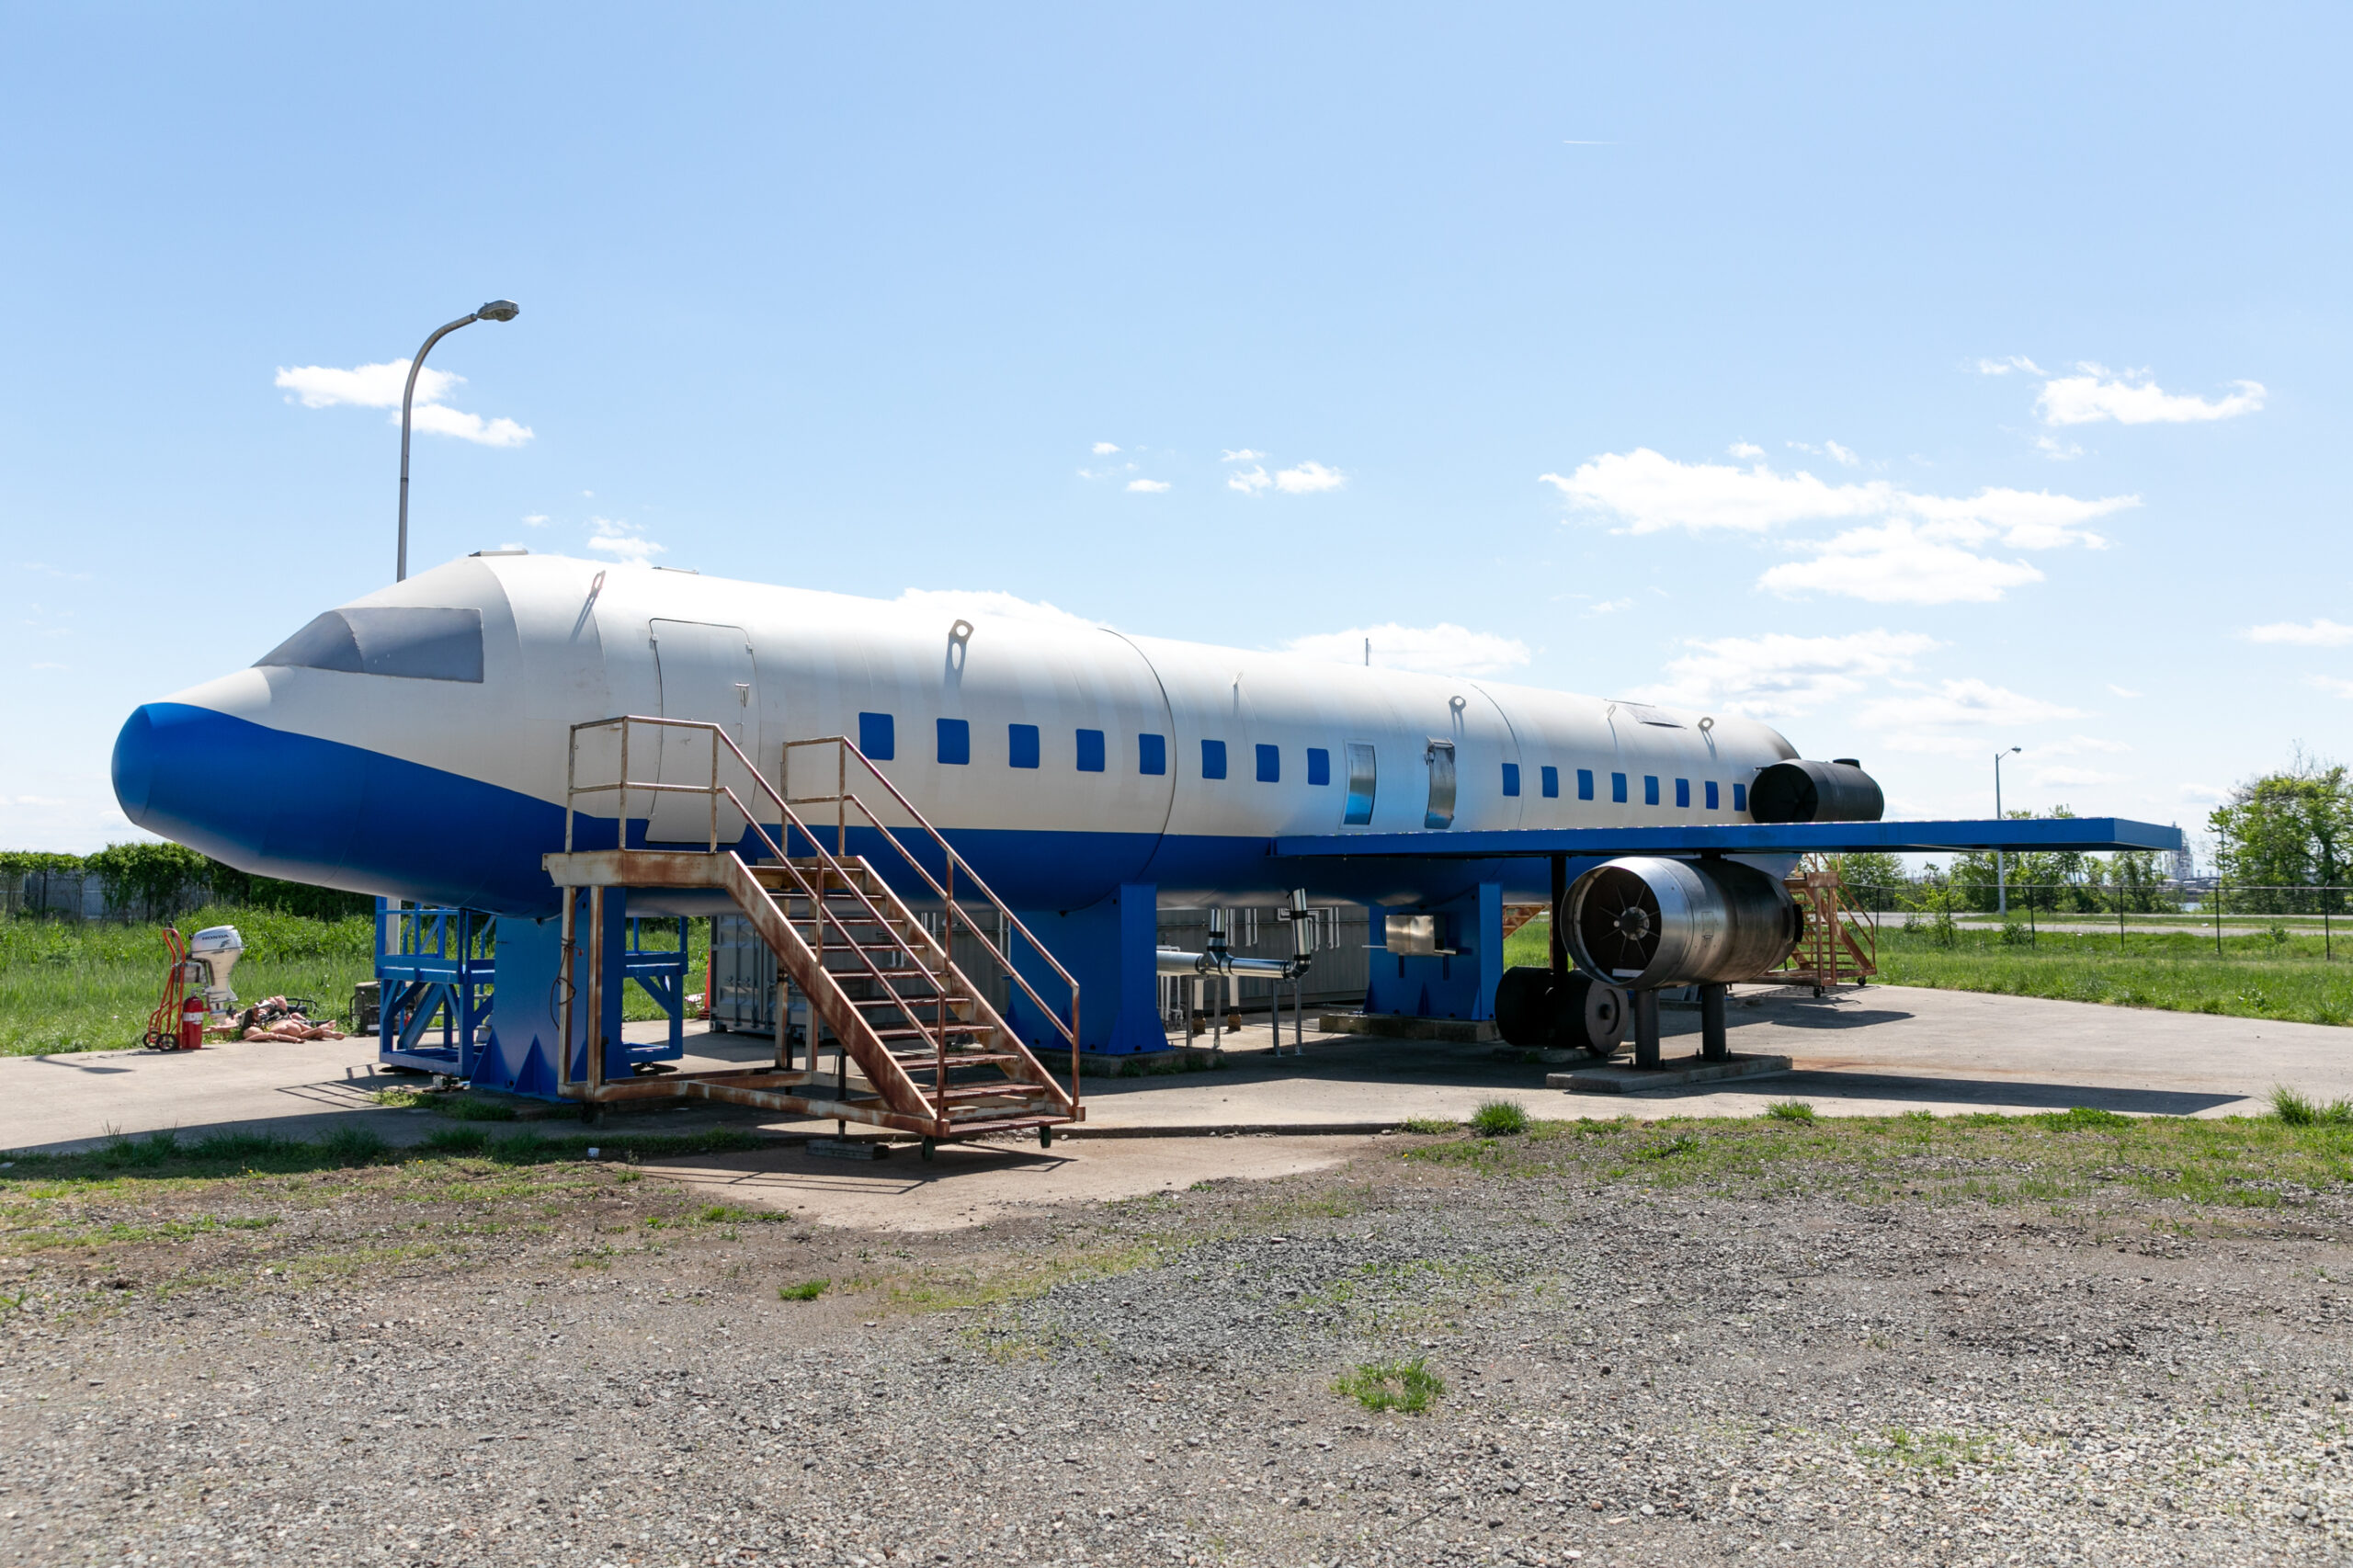 The Specialized Aircraft Fire Trainer (SAFT), where teams are trained for emergencies within an aircraft